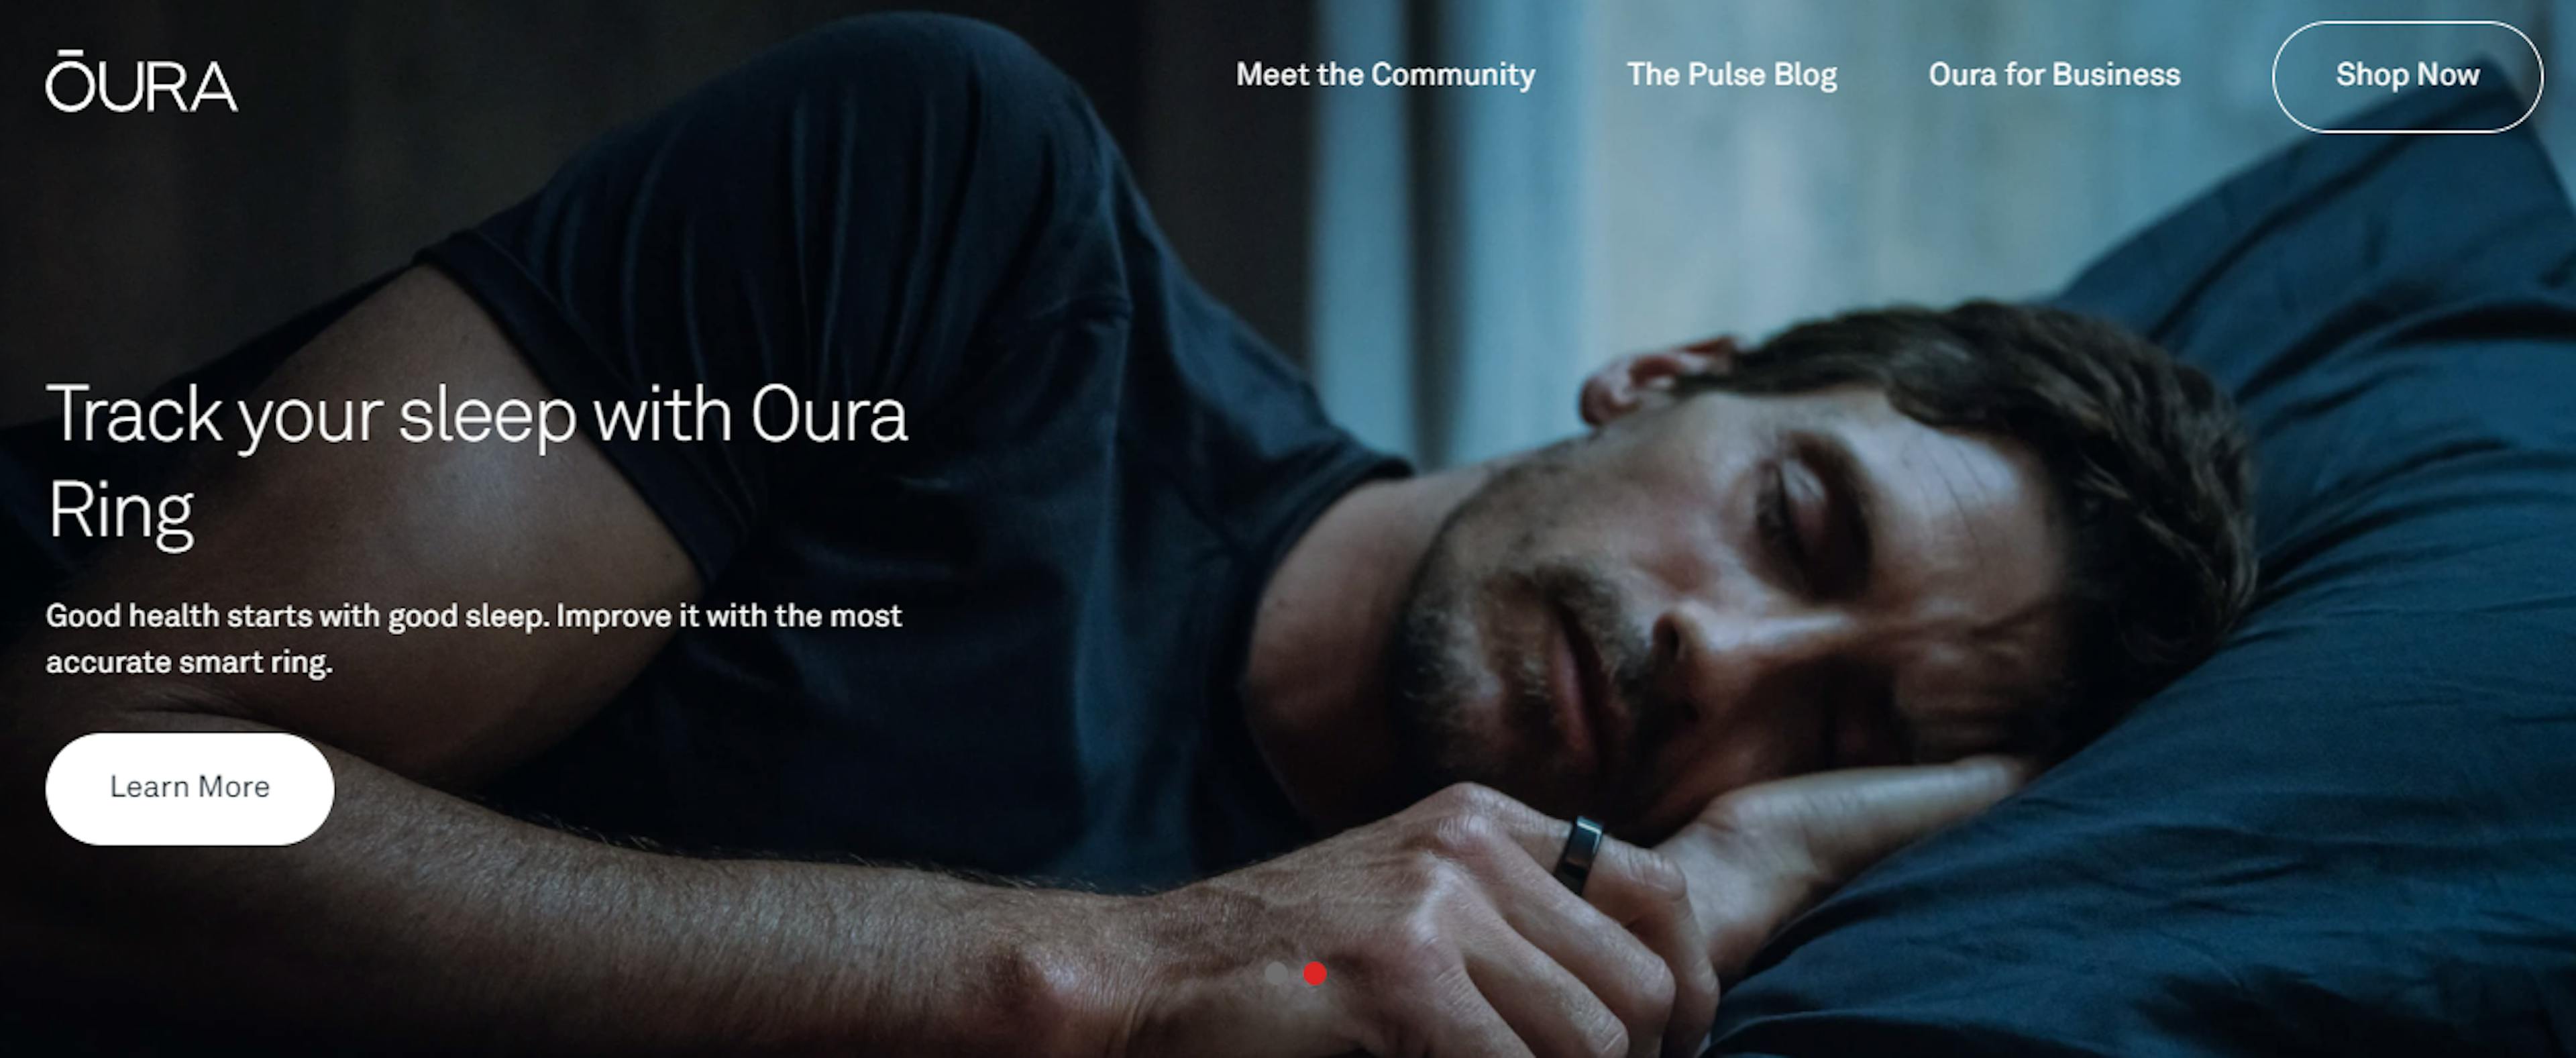 Oura is one of the most successful direct-to-consumer brands